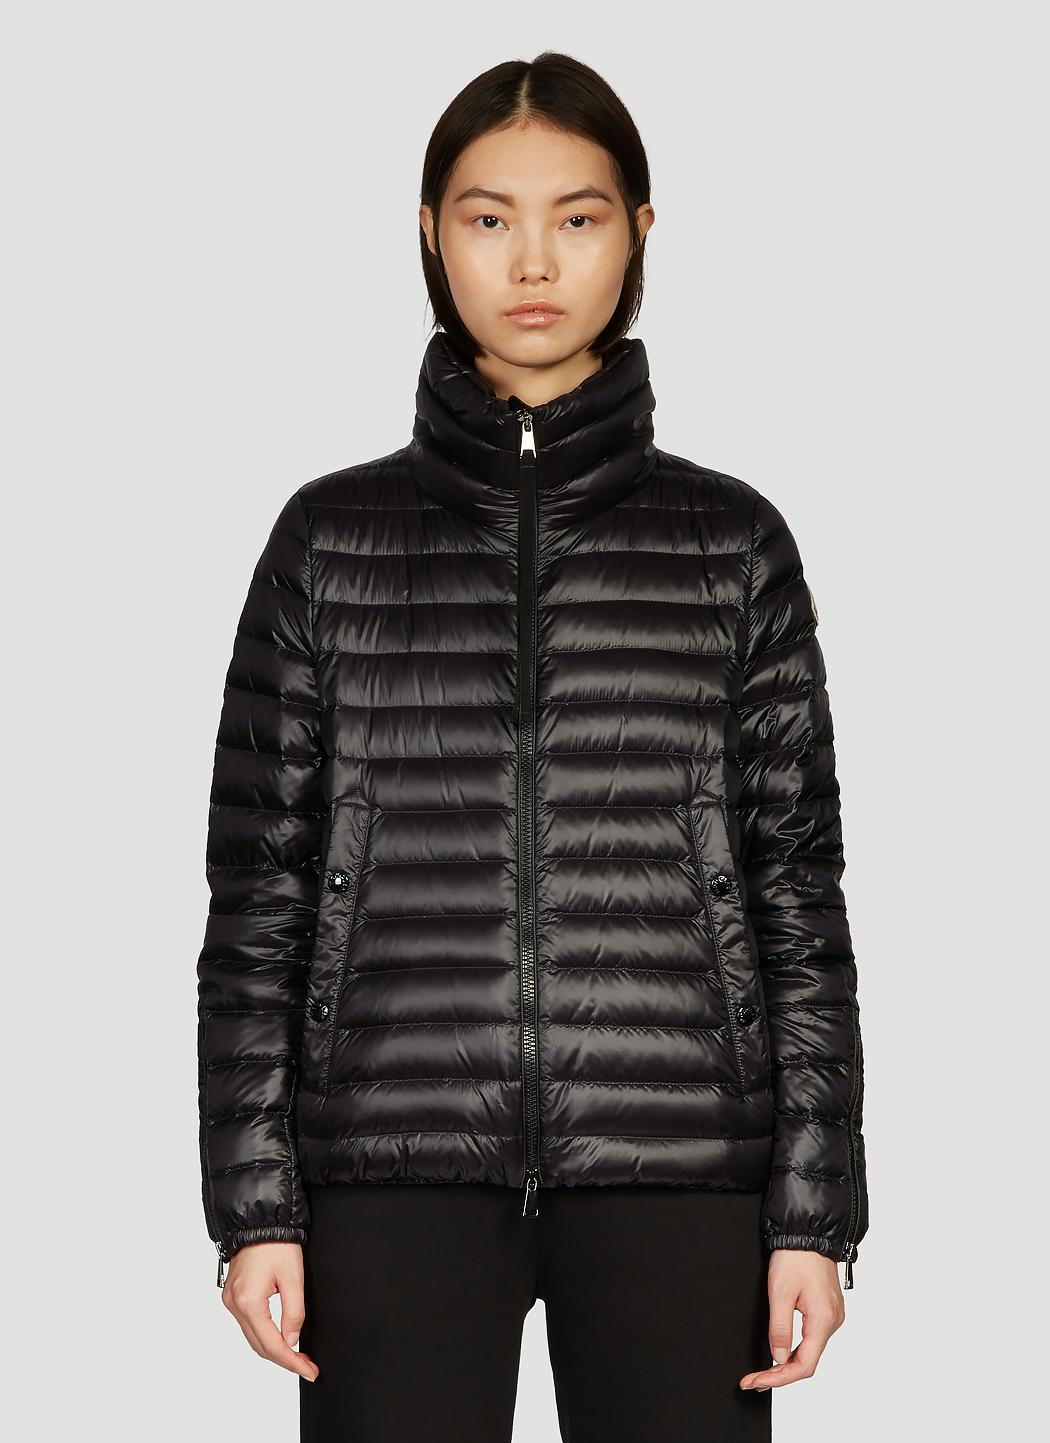 Moncler Synthetic Puffer Jacket in Black - Lyst